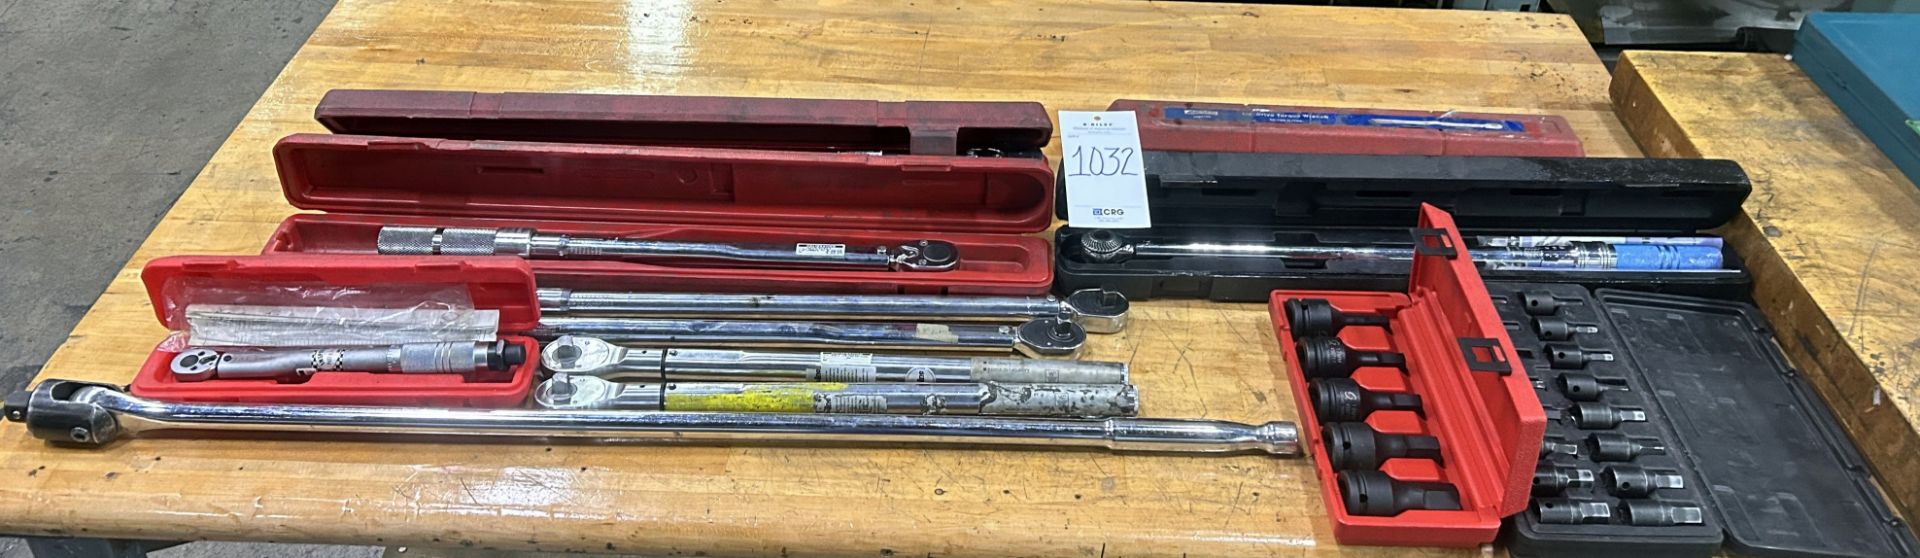 Large assortment of torque wrenches and sockets